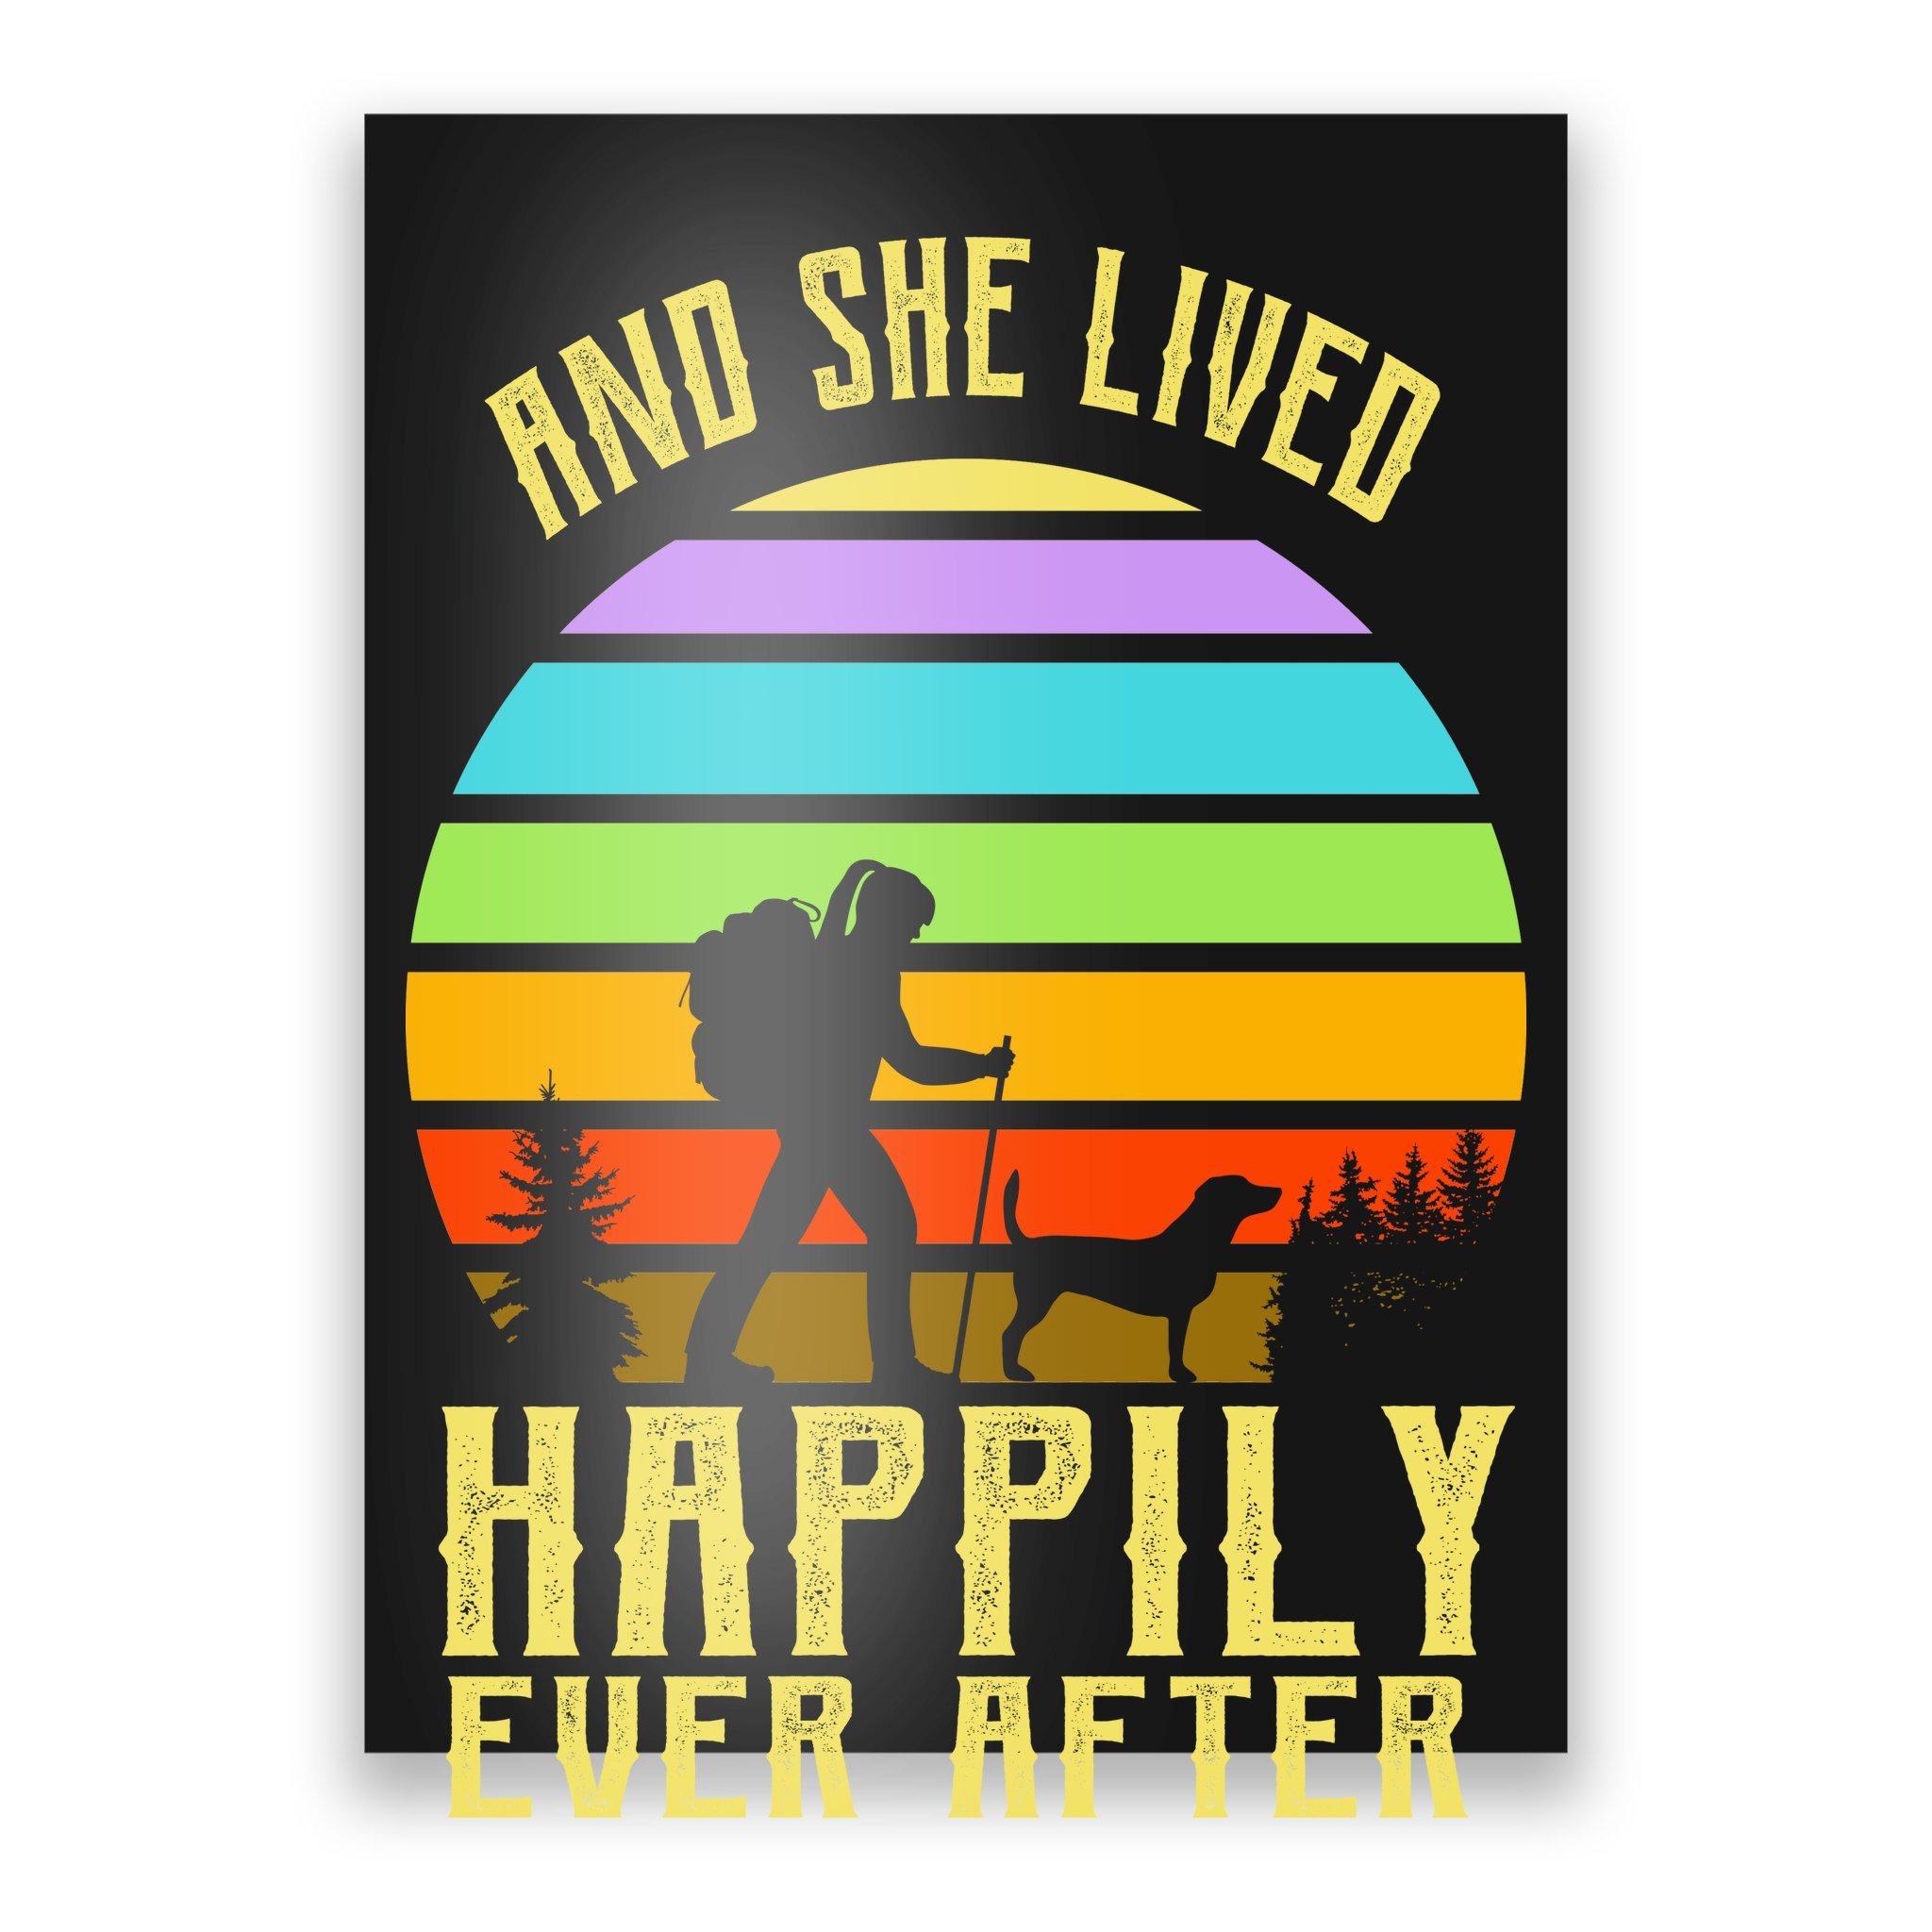 And She Lived Happily Ever After Mountain Hiker Camper Climber Mountaineer Backpacking